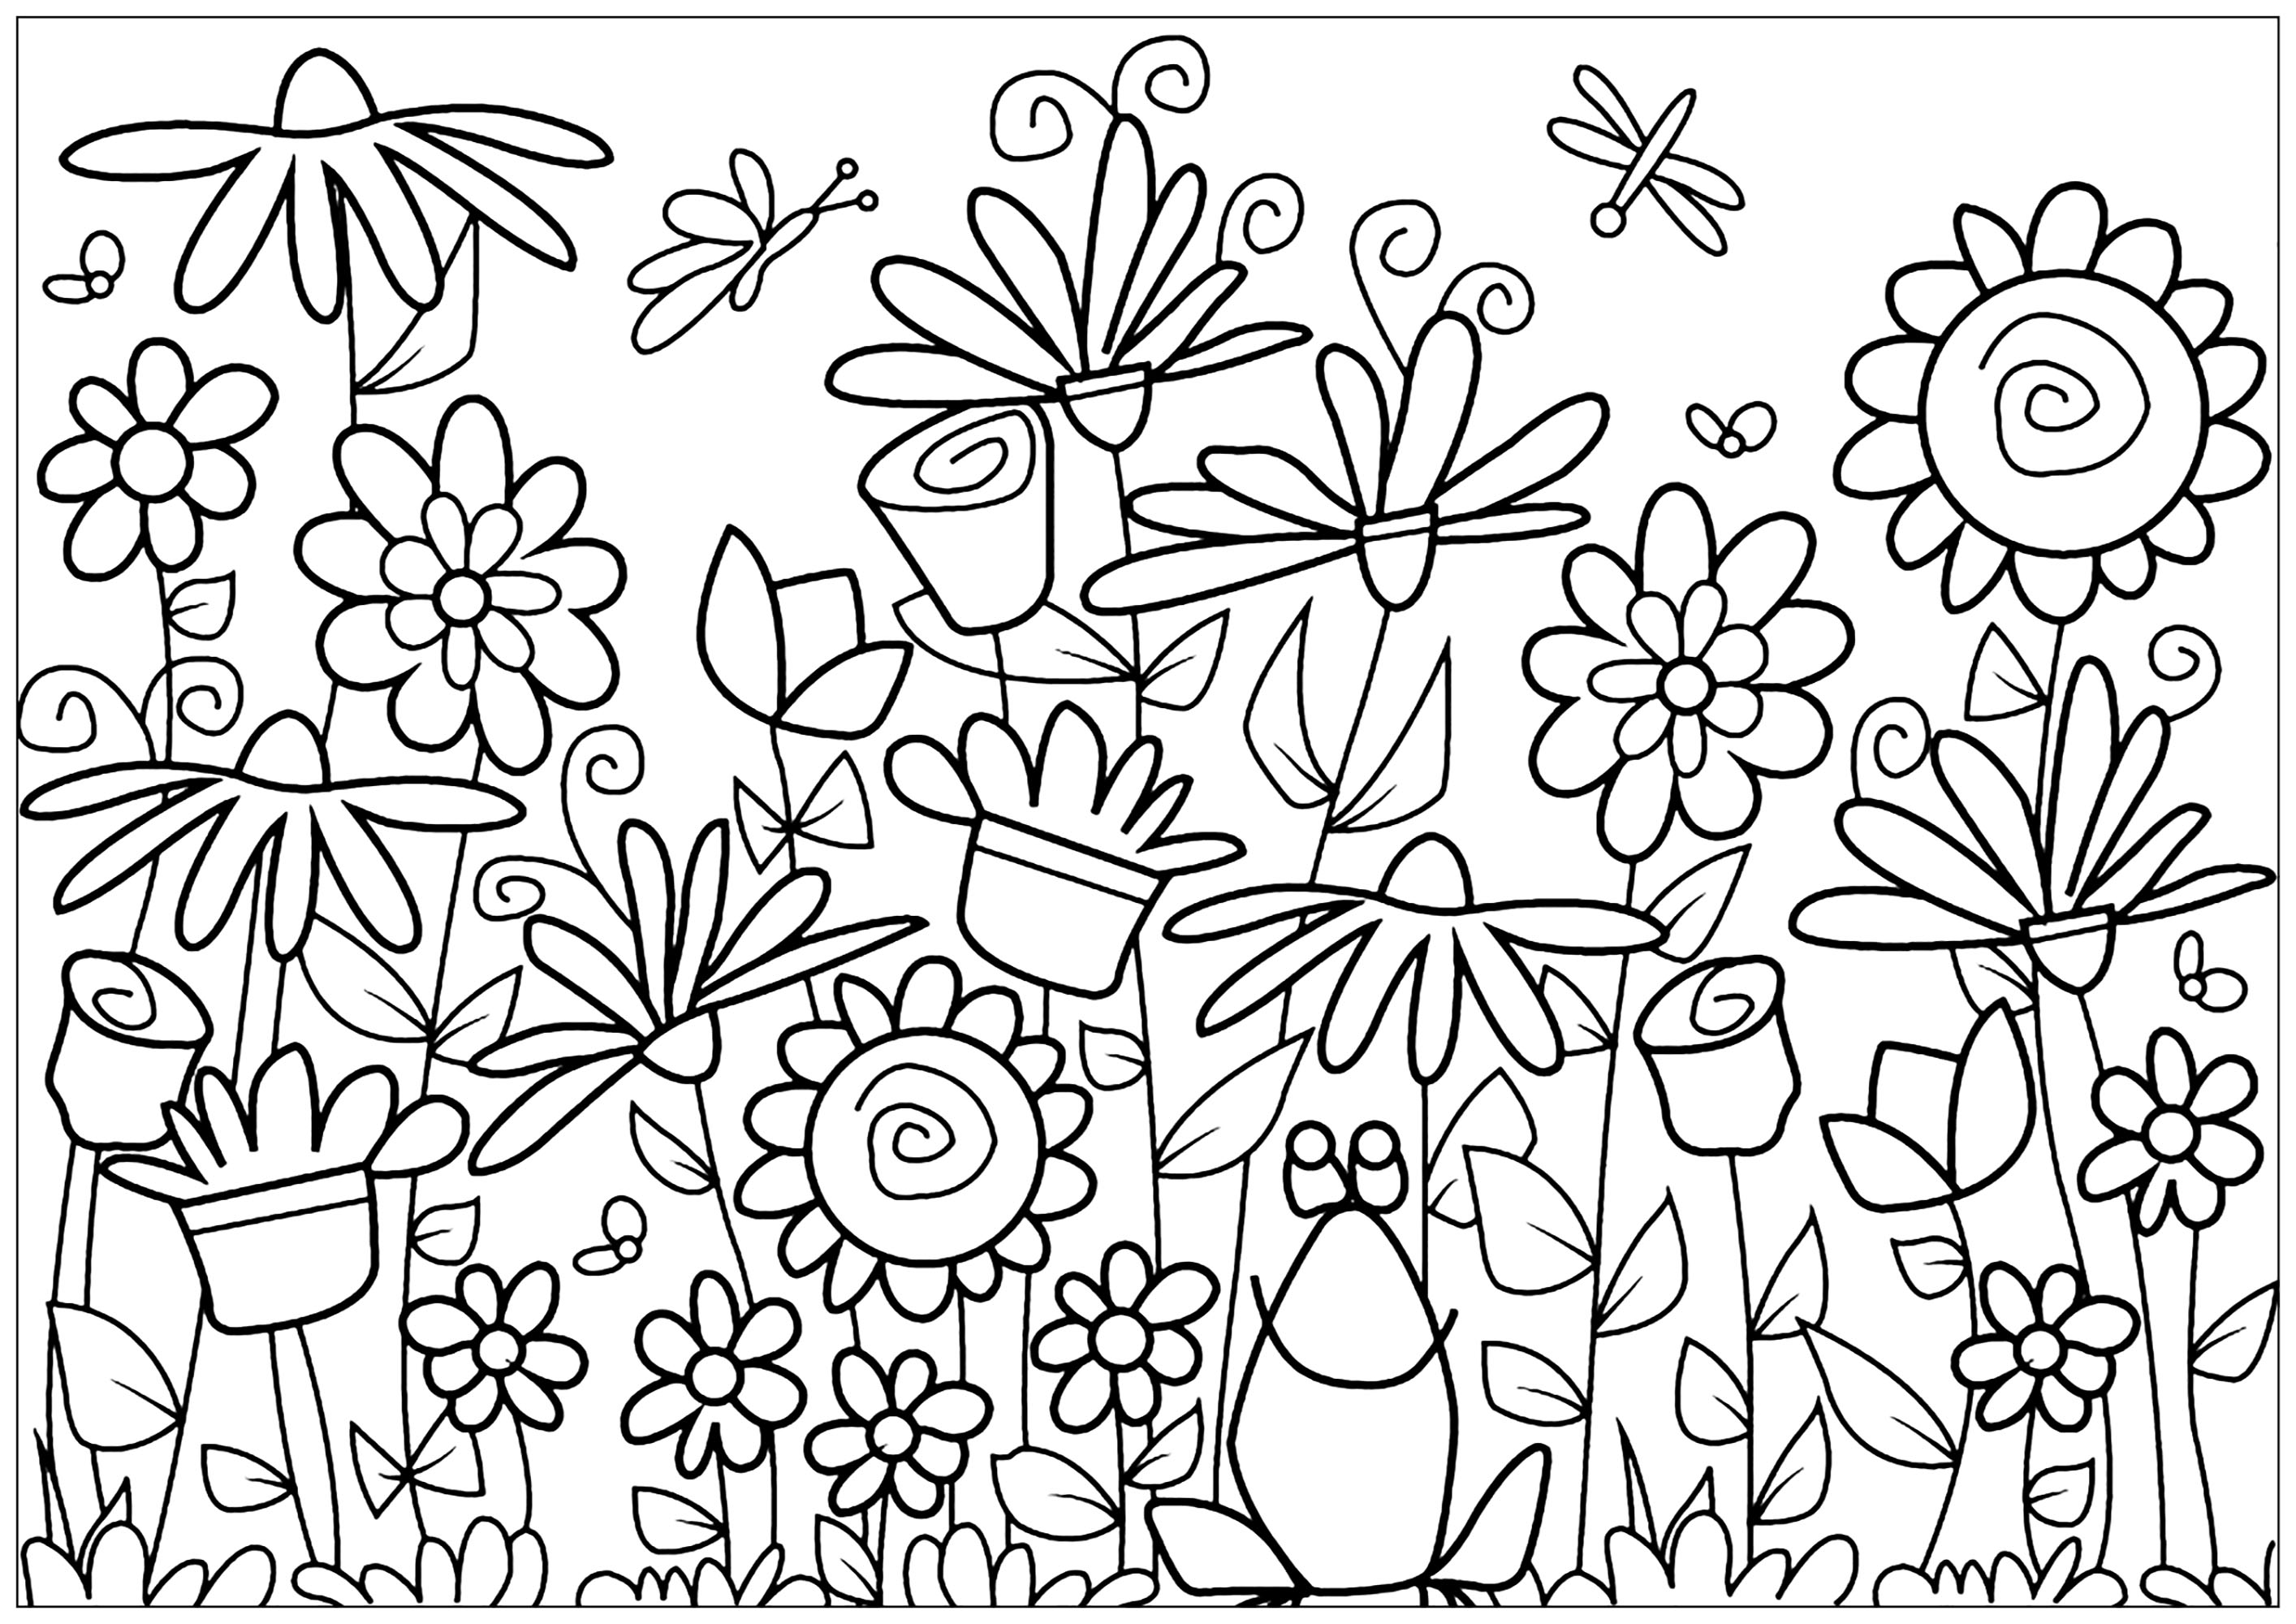 Various flowers with a cute frog Flowers Adult Coloring